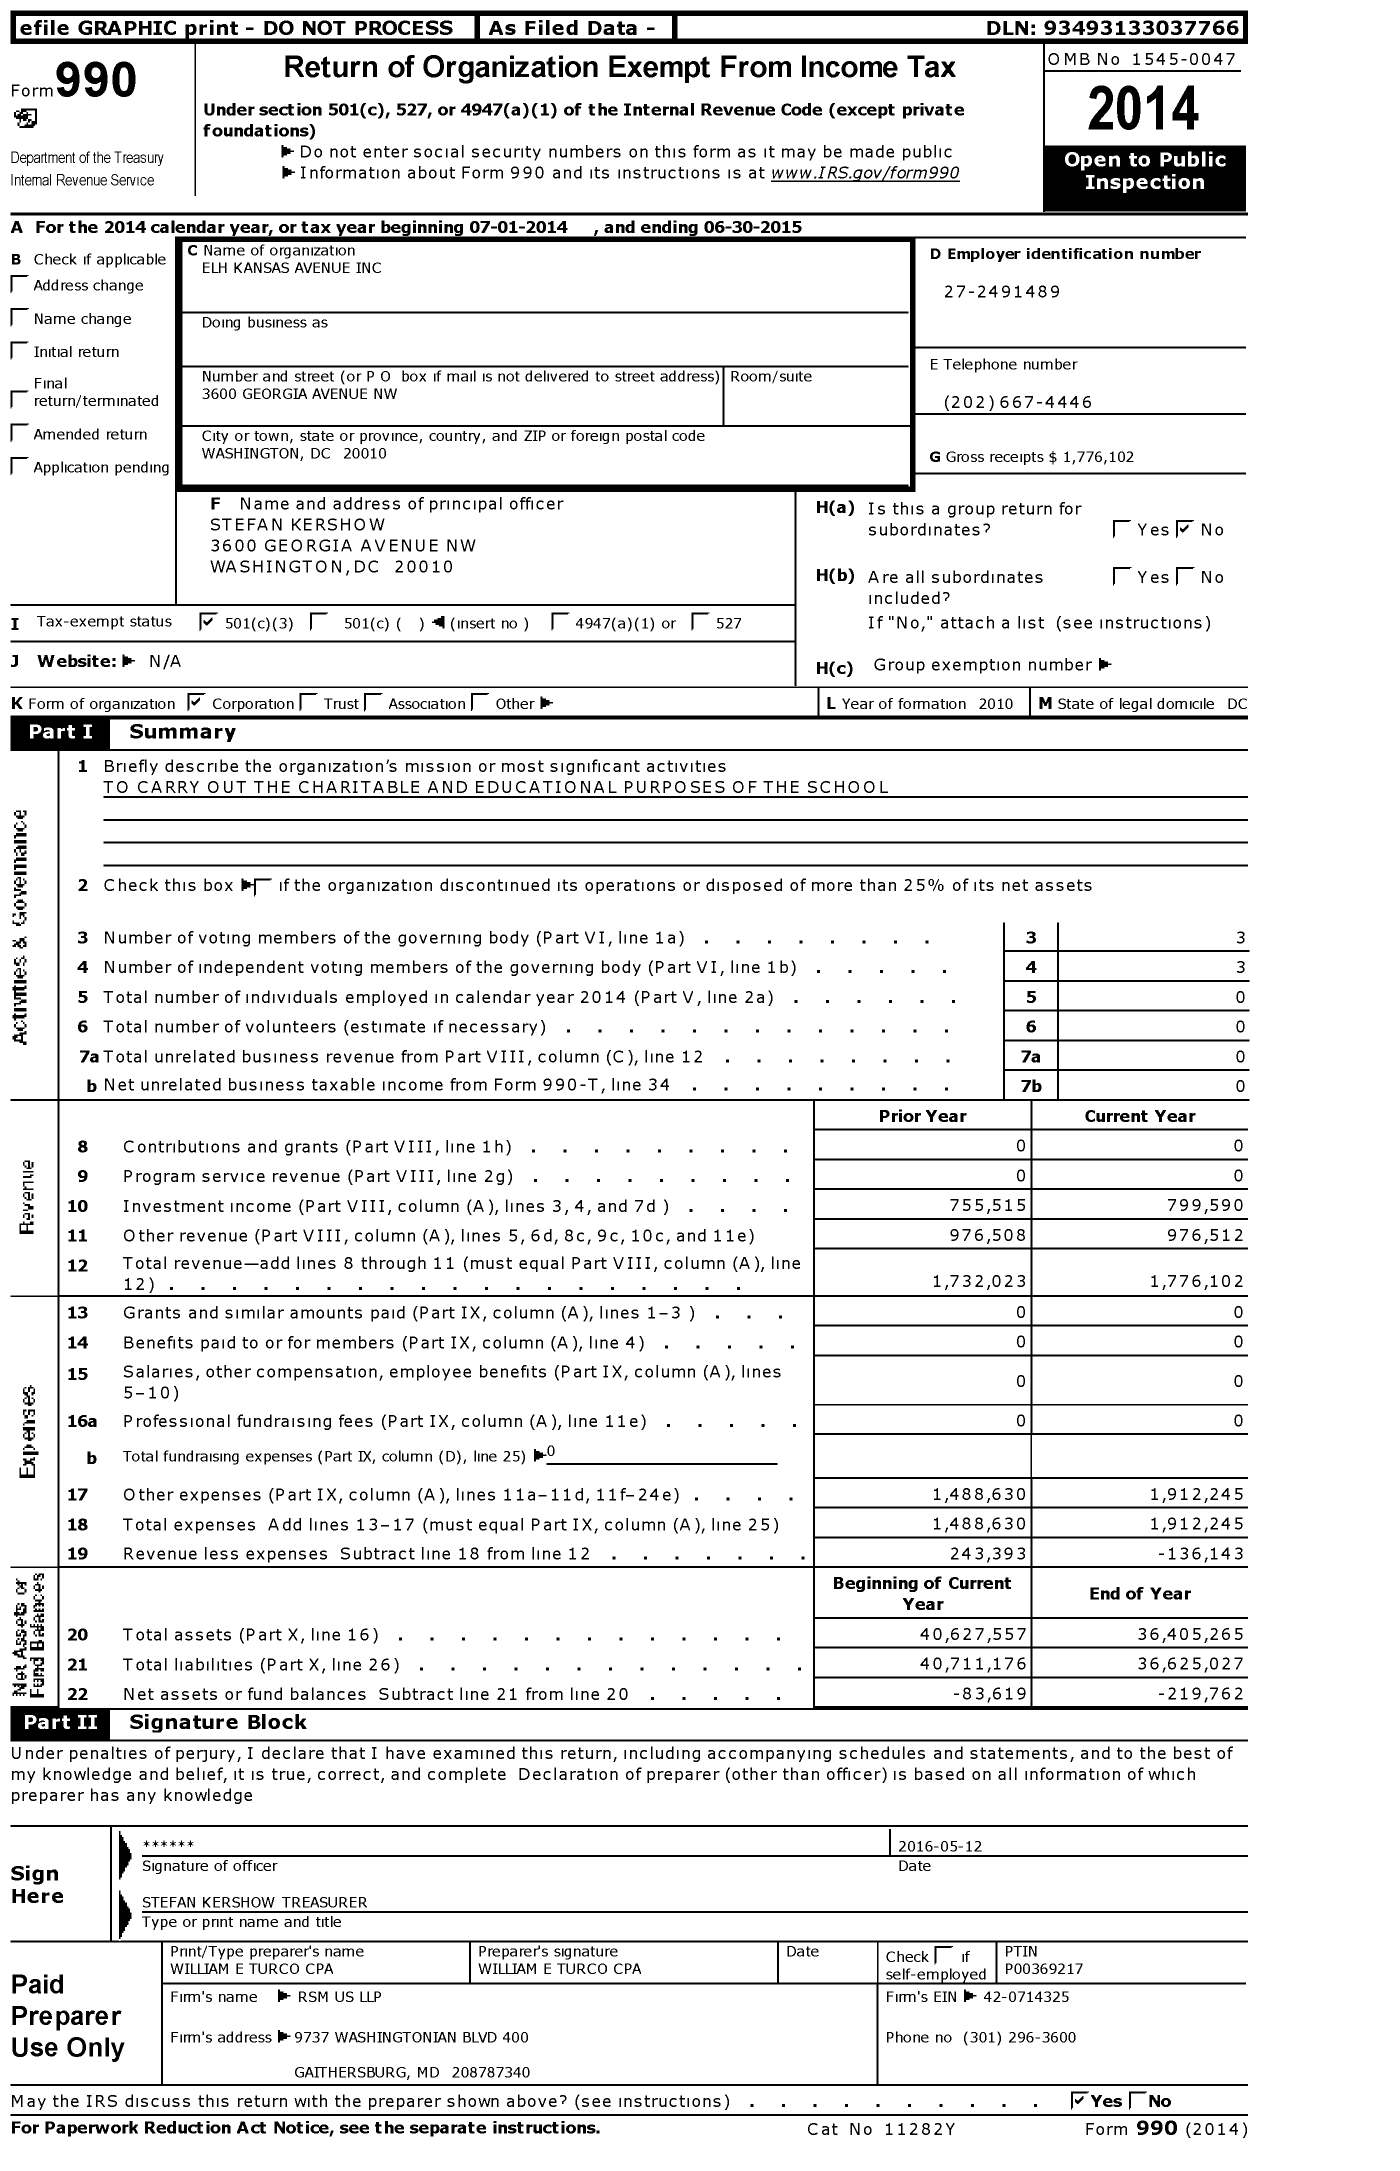 Image of first page of 2014 Form 990 for Elh Kansas Avenue